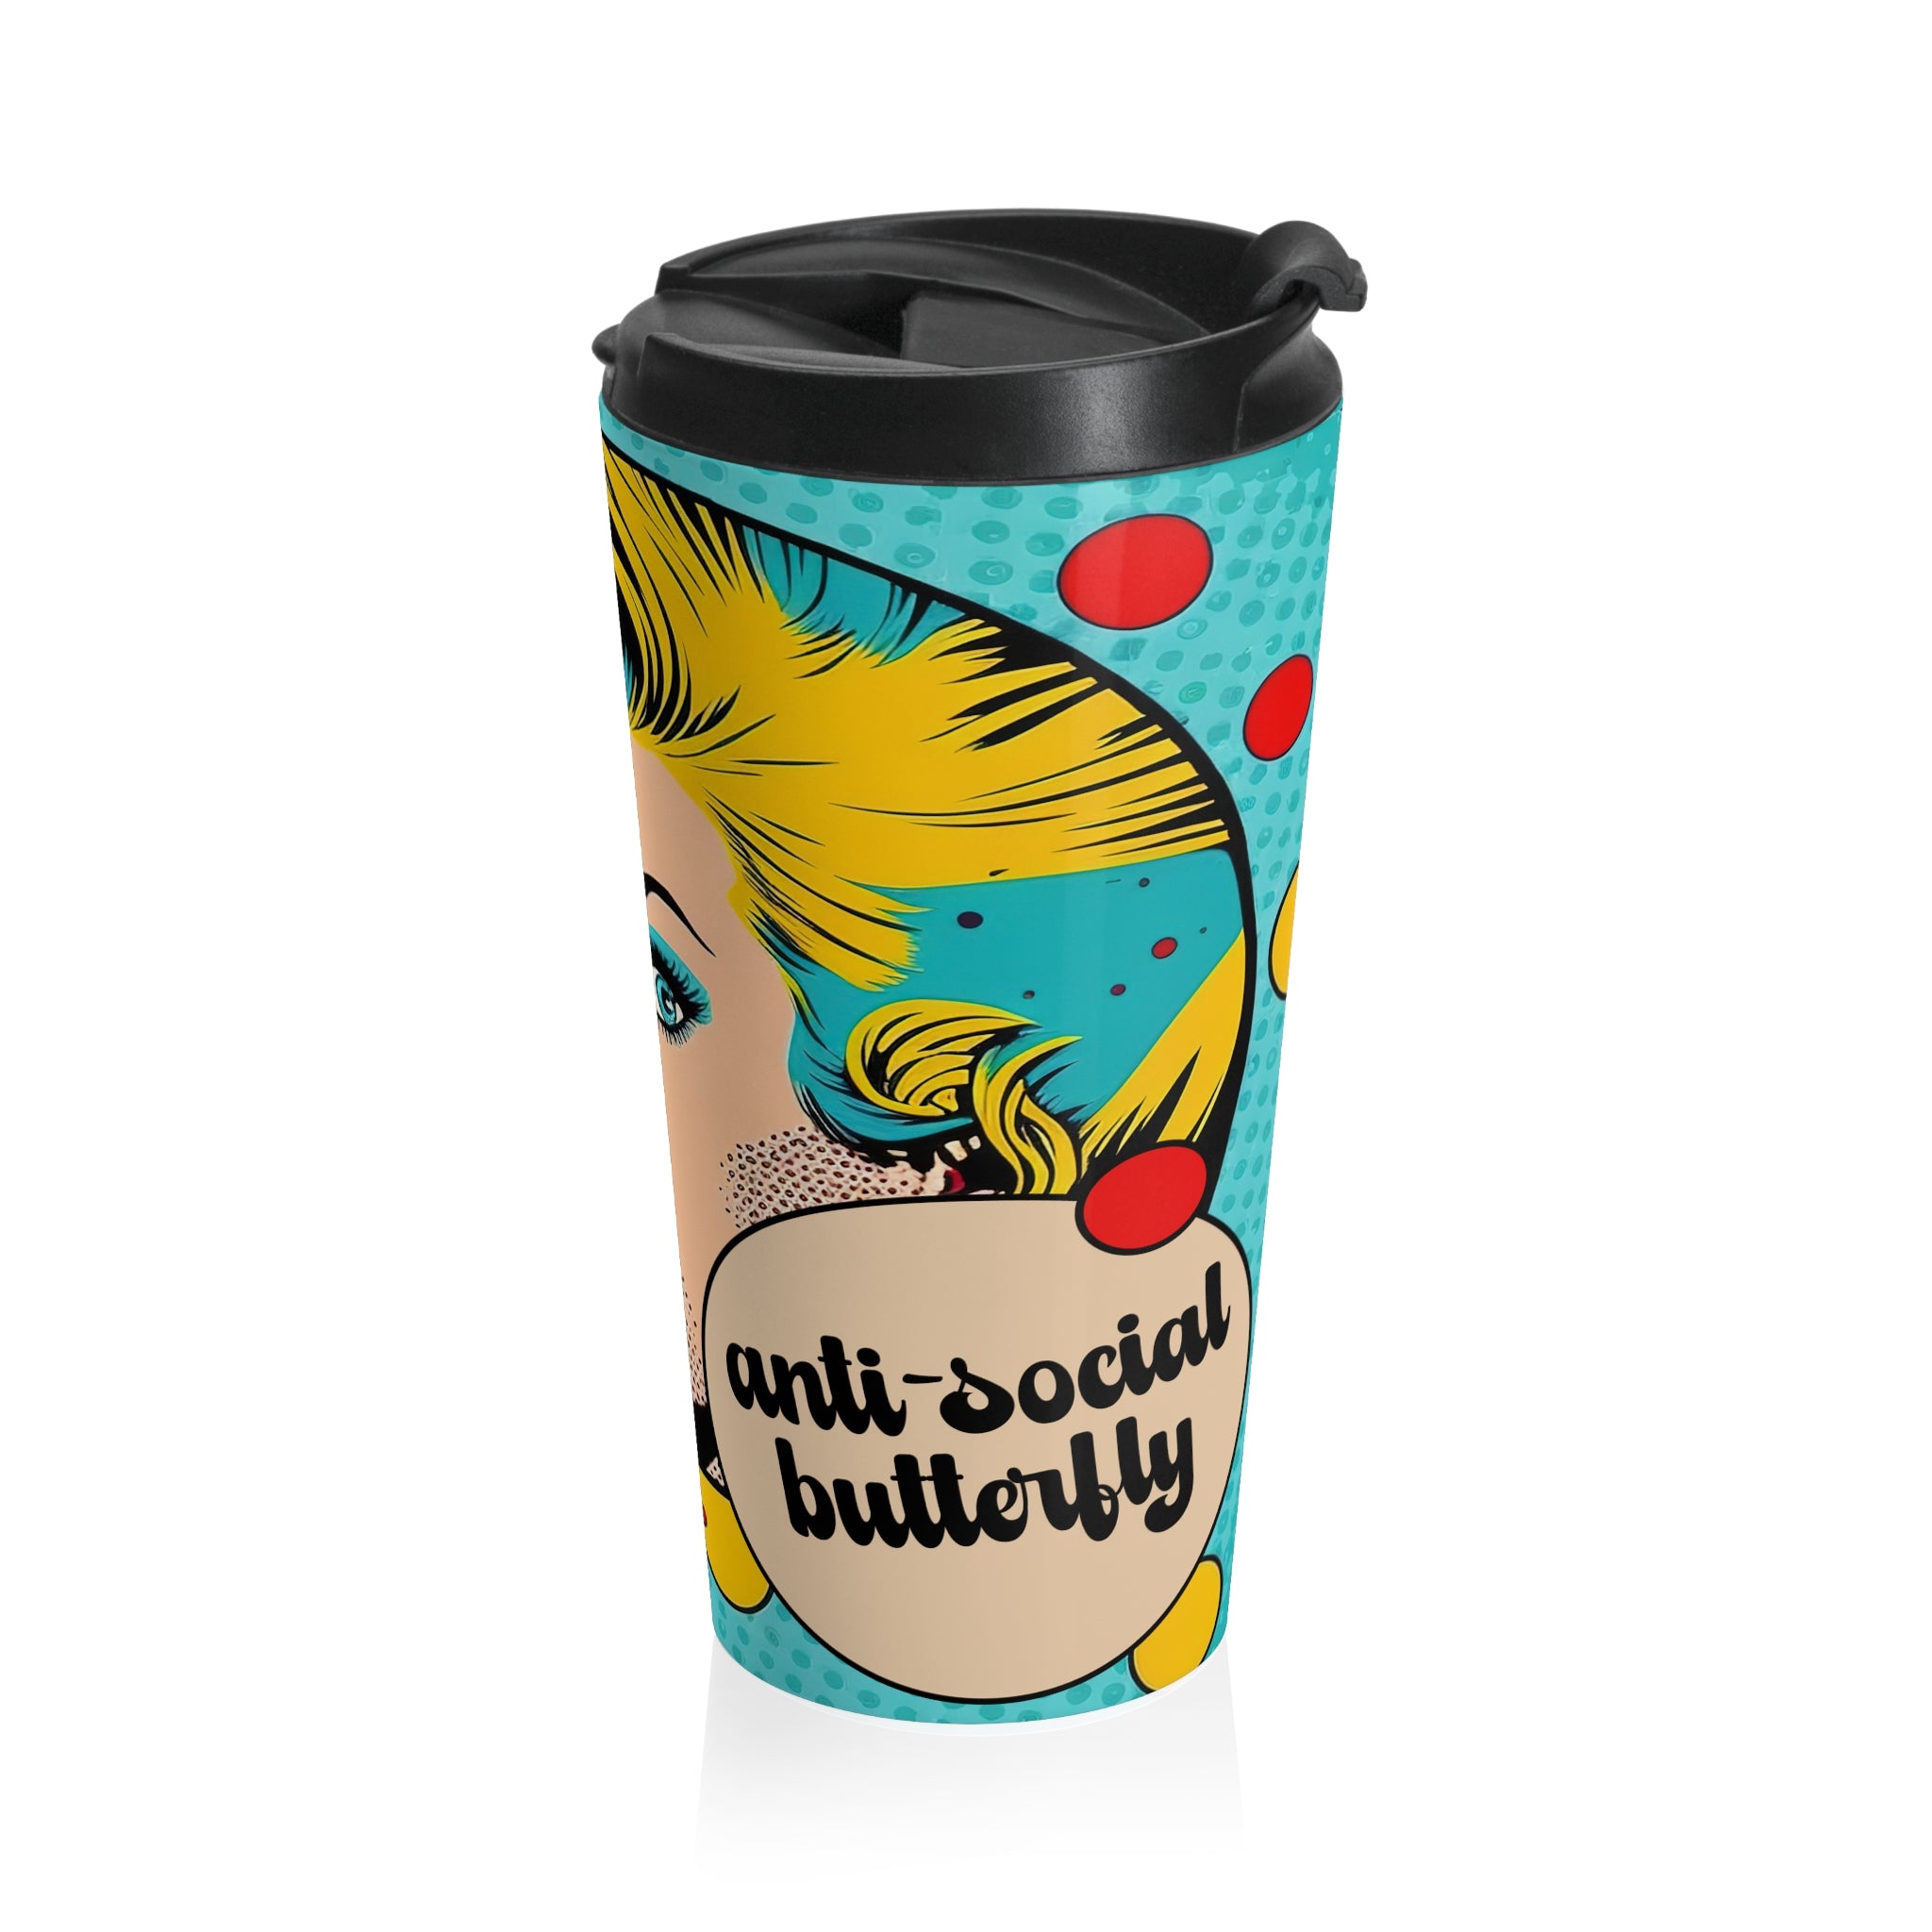 Anti-Social Butterfly Funny Sarcastic 15 oz Travel Mug, Stainless Steel Tumbler, Insulated Mug, Gift for Sarcastic, Travel Tumble